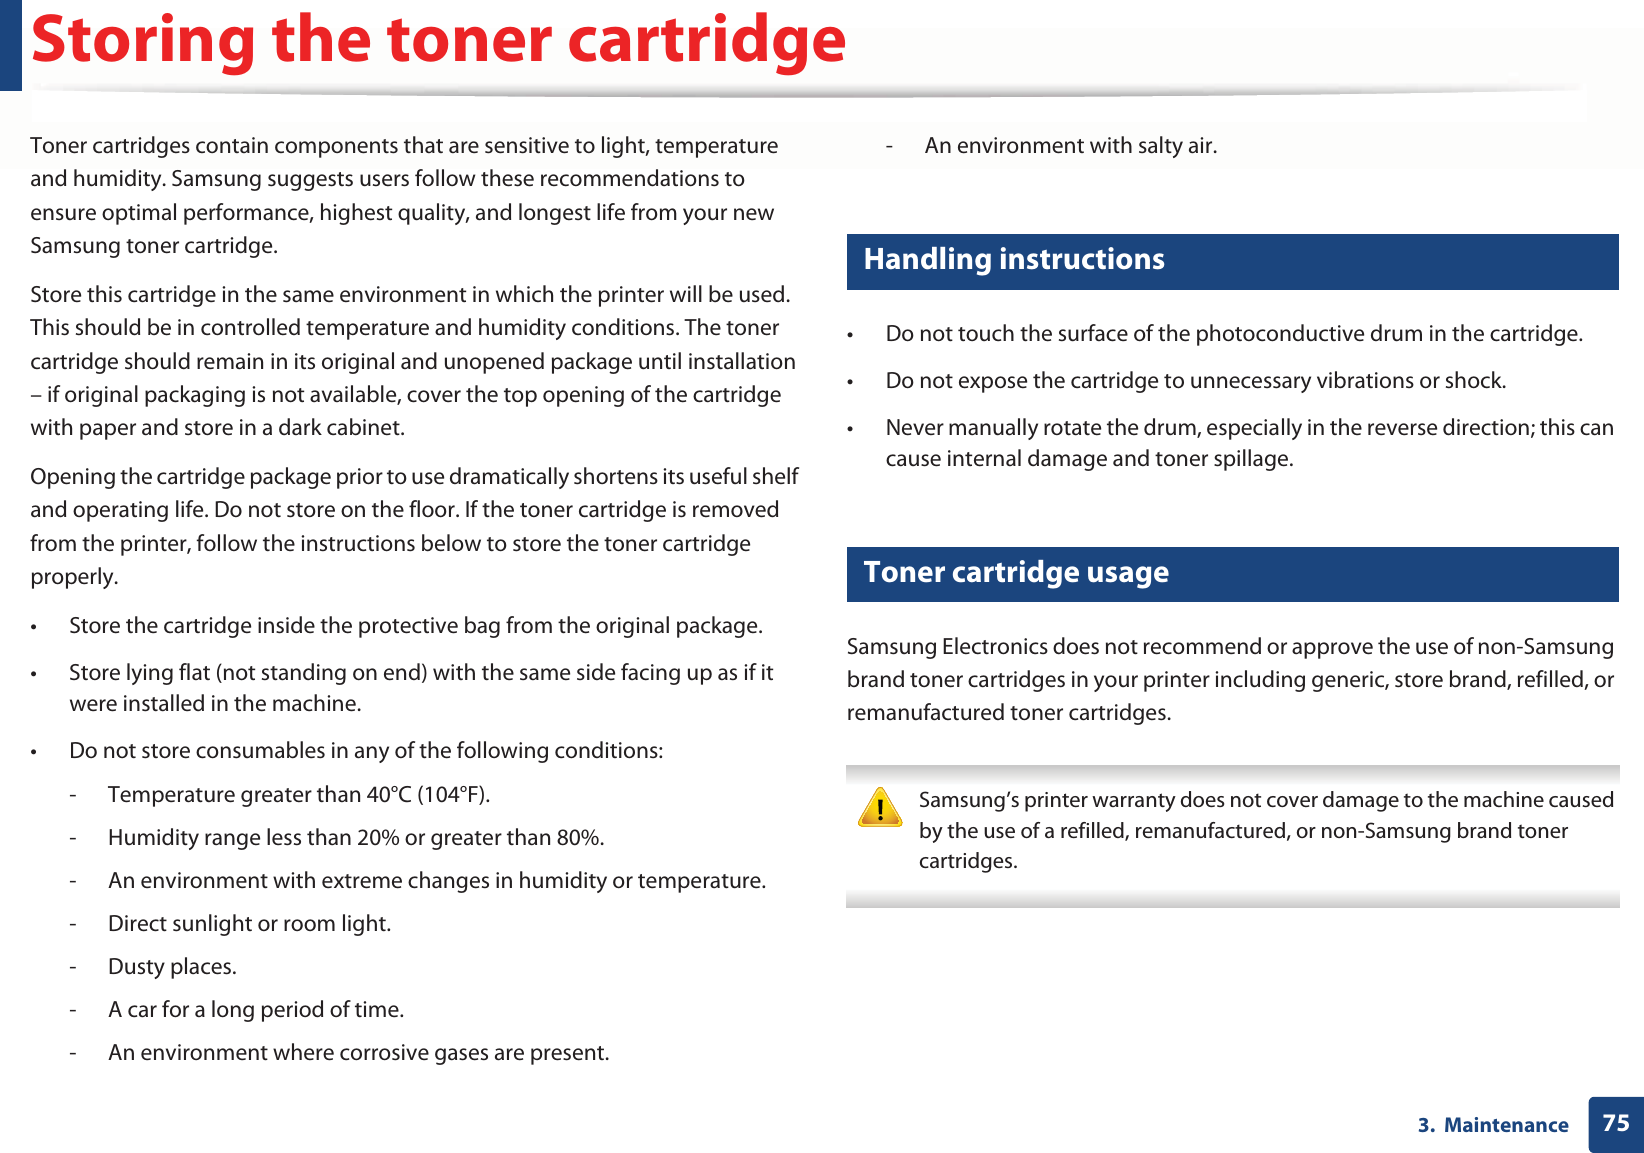 753.  MaintenanceStoring the toner cartridgeToner cartridges contain components that are sensitive to light, temperature and humidity. Samsung suggests users follow these recommendations to ensure optimal performance, highest quality, and longest life from your new Samsung toner cartridge.Store this cartridge in the same environment in which the printer will be used. This should be in controlled temperature and humidity conditions. The toner cartridge should remain in its original and unopened package until installation – if original packaging is not available, cover the top opening of the cartridge with paper and store in a dark cabinet.Opening the cartridge package prior to use dramatically shortens its useful shelf and operating life. Do not store on the floor. If the toner cartridge is removed from the printer, follow the instructions below to store the toner cartridge properly.• Store the cartridge inside the protective bag from the original package. • Store lying flat (not standing on end) with the same side facing up as if it were installed in the machine.• Do not store consumables in any of the following conditions:- Temperature greater than 40°C (104°F).- Humidity range less than 20% or greater than 80%.- An environment with extreme changes in humidity or temperature.- Direct sunlight or room light.- Dusty places.- A car for a long period of time.- An environment where corrosive gases are present.- An environment with salty air.1 Handling instructions• Do not touch the surface of the photoconductive drum in the cartridge.• Do not expose the cartridge to unnecessary vibrations or shock.• Never manually rotate the drum, especially in the reverse direction; this can cause internal damage and toner spillage.2 Toner cartridge usageSamsung Electronics does not recommend or approve the use of non-Samsung brand toner cartridges in your printer including generic, store brand, refilled, or remanufactured toner cartridges. Samsung’s printer warranty does not cover damage to the machine caused by the use of a refilled, remanufactured, or non-Samsung brand toner cartridges. 